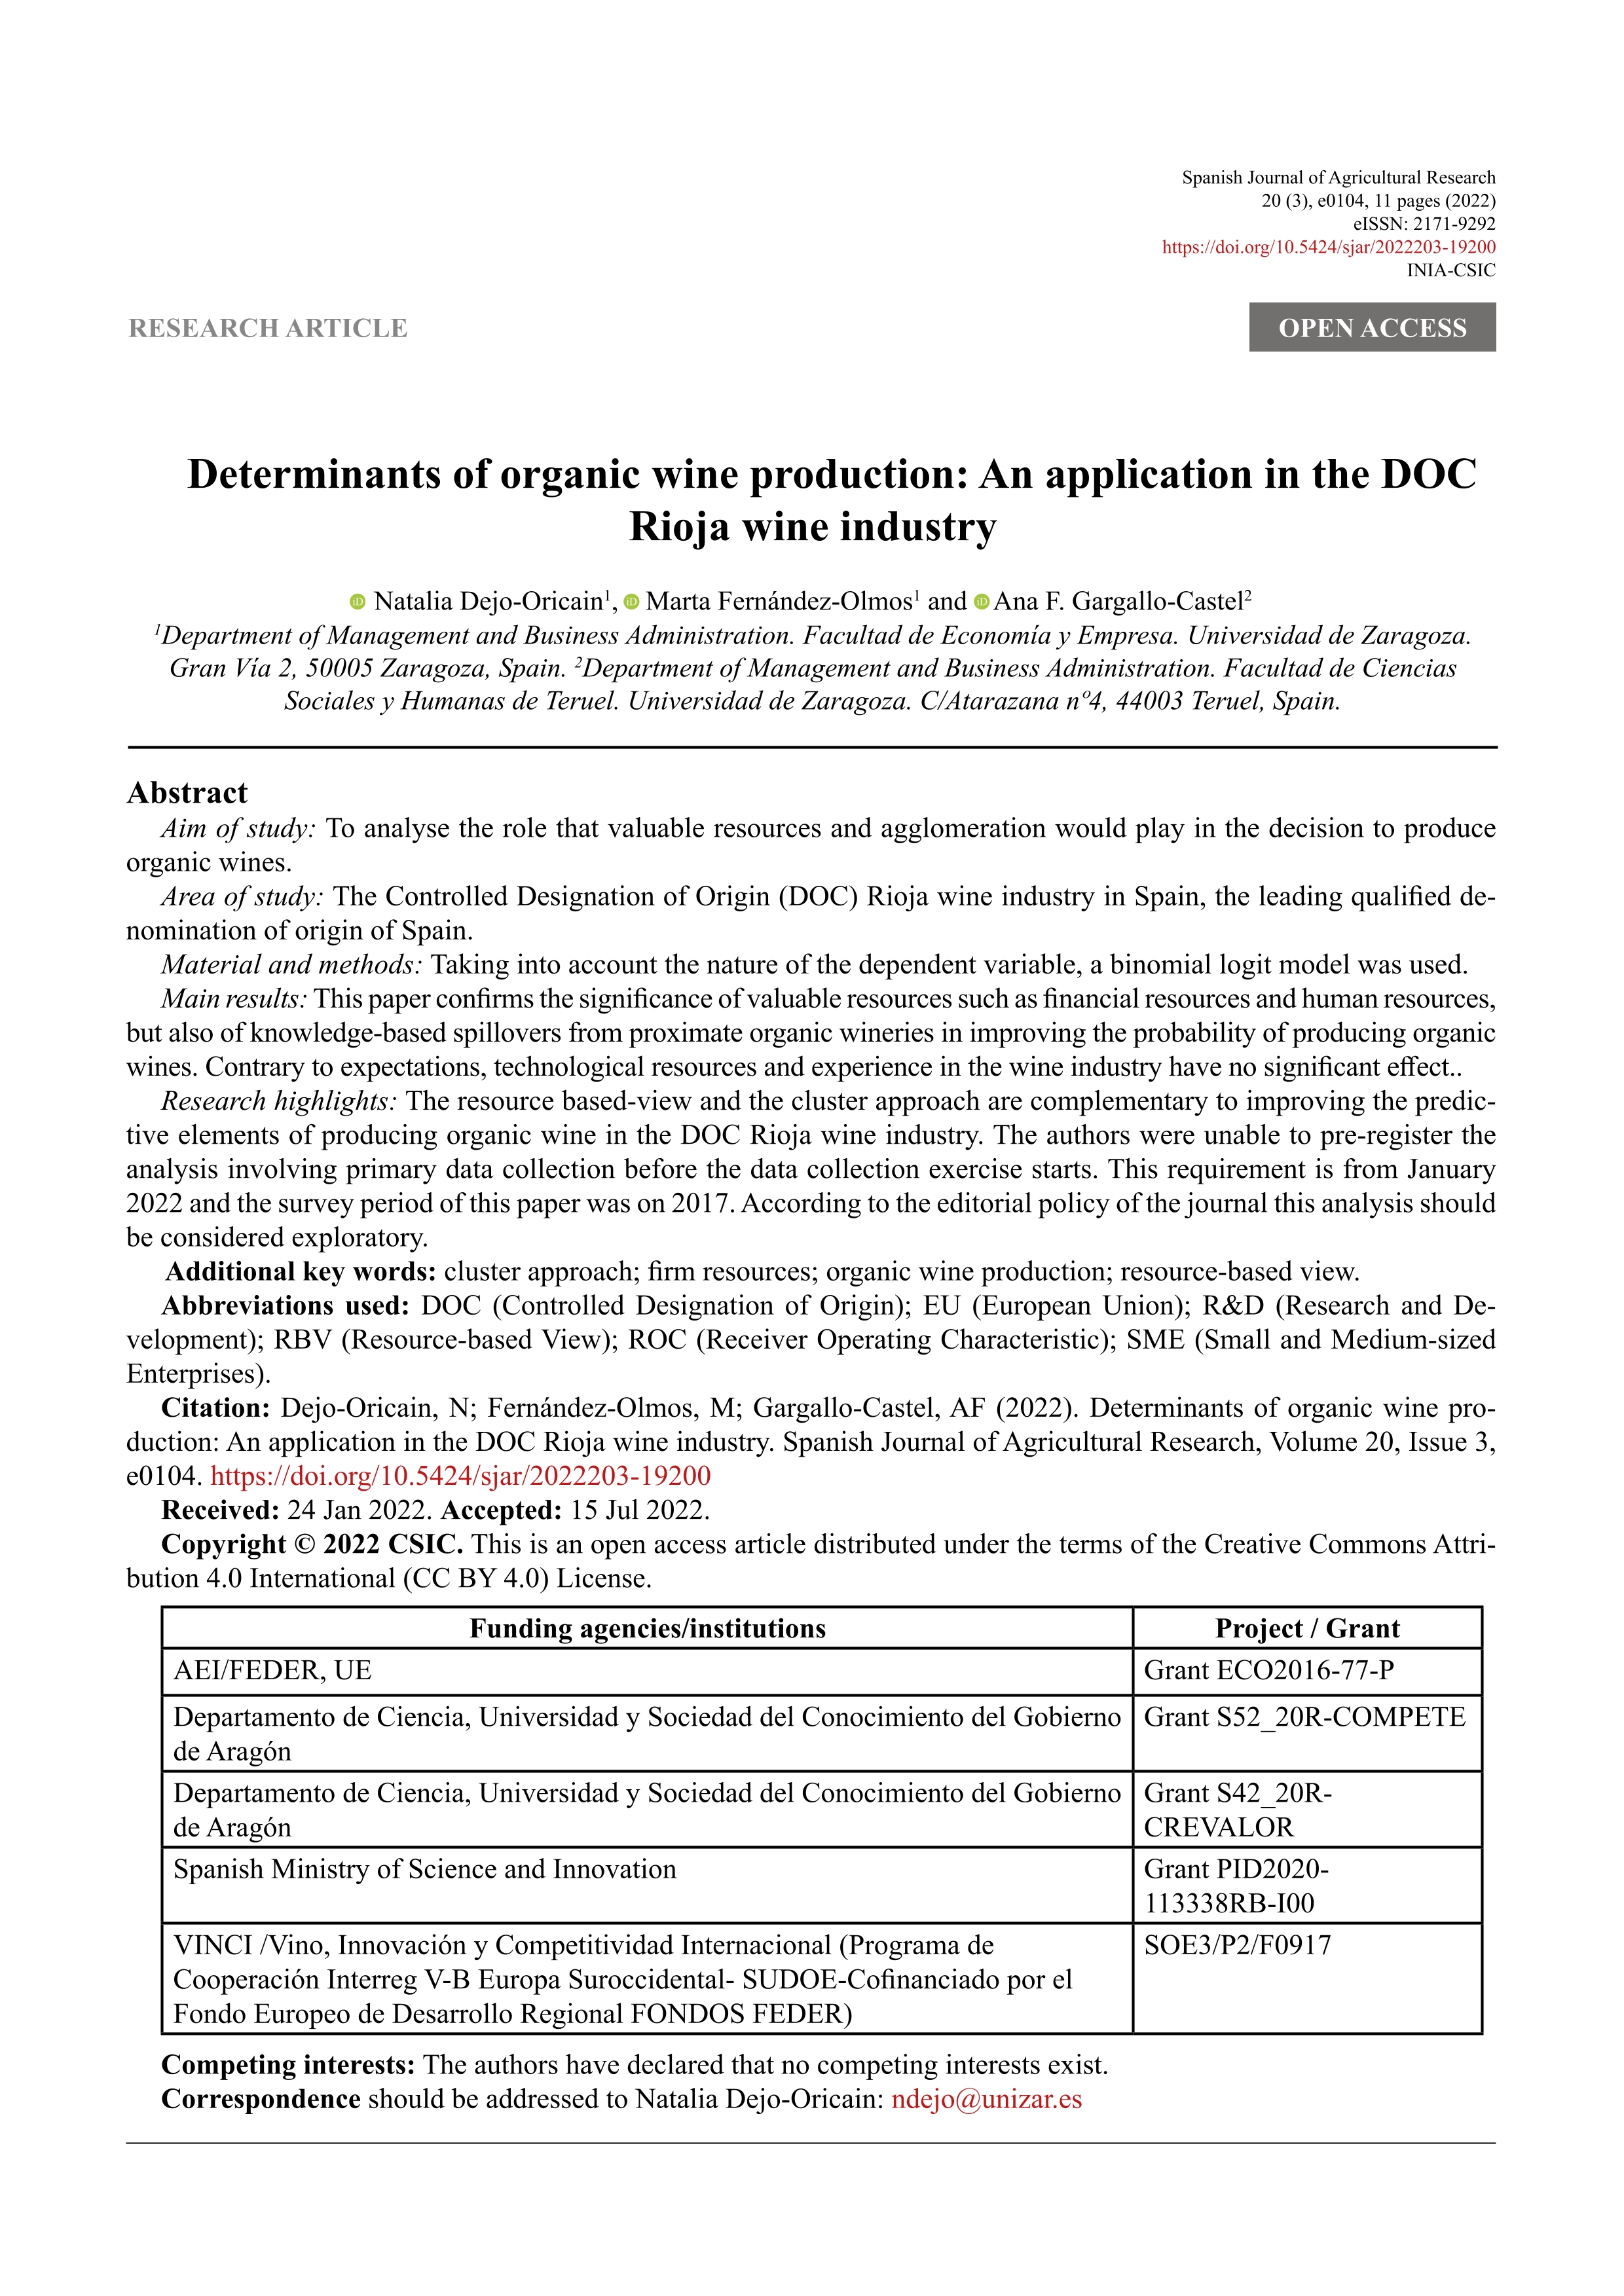 Determinants of organic wine production: an application in the DOC Rioja wine industry